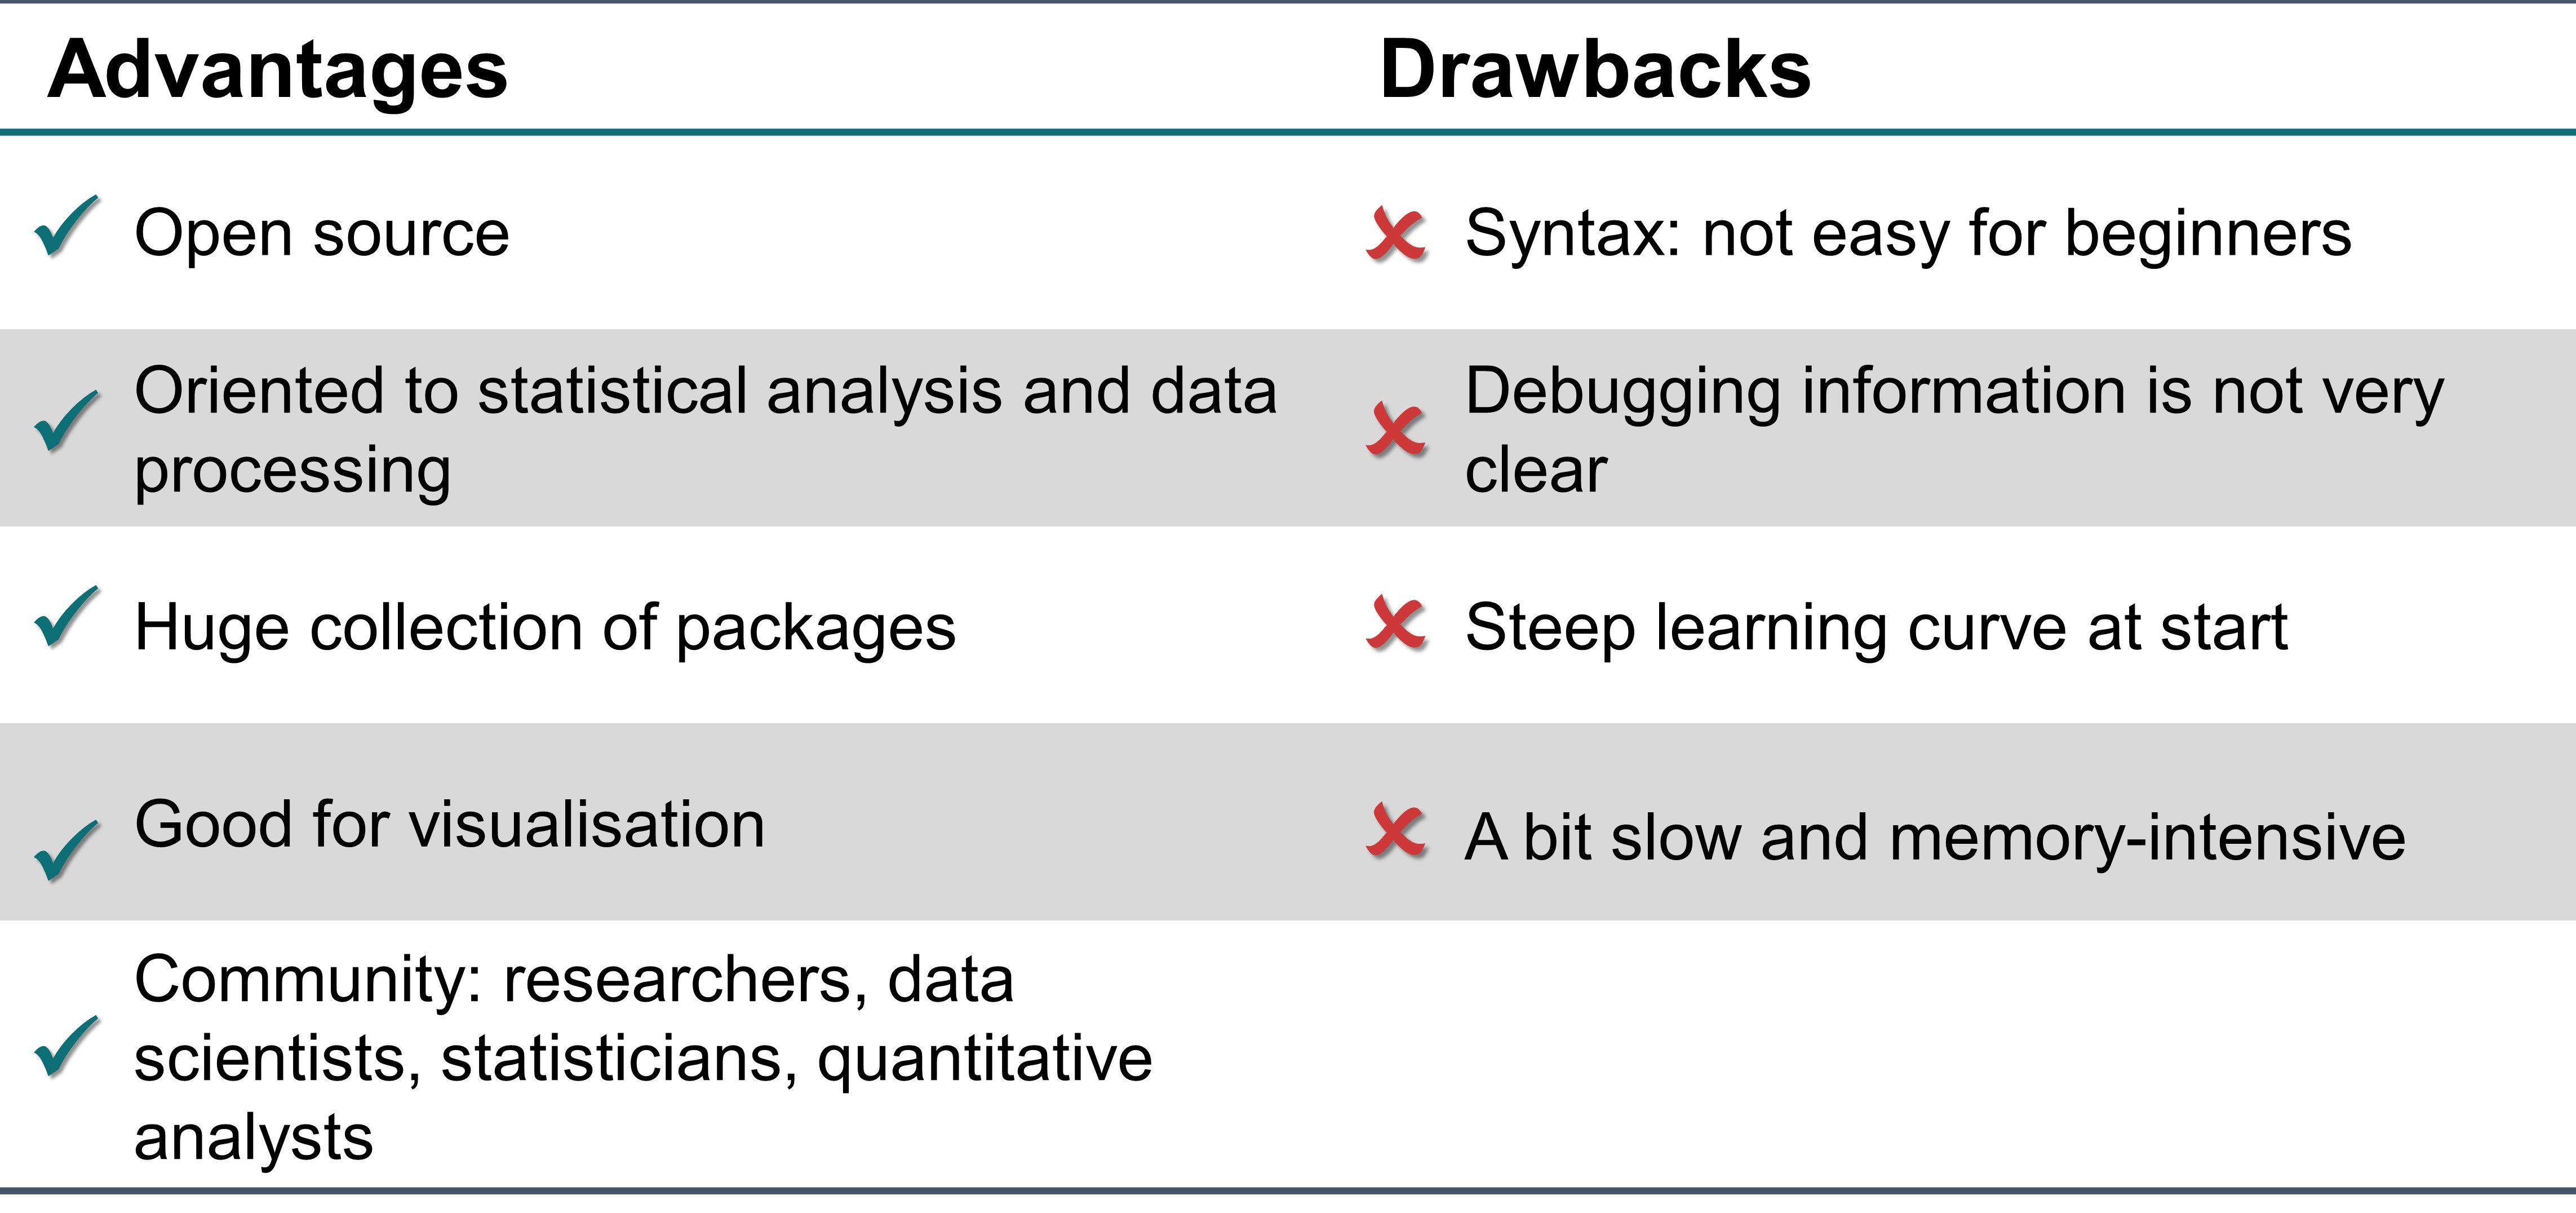 Table 6.4.4 The advantages and drawbacks of Julia